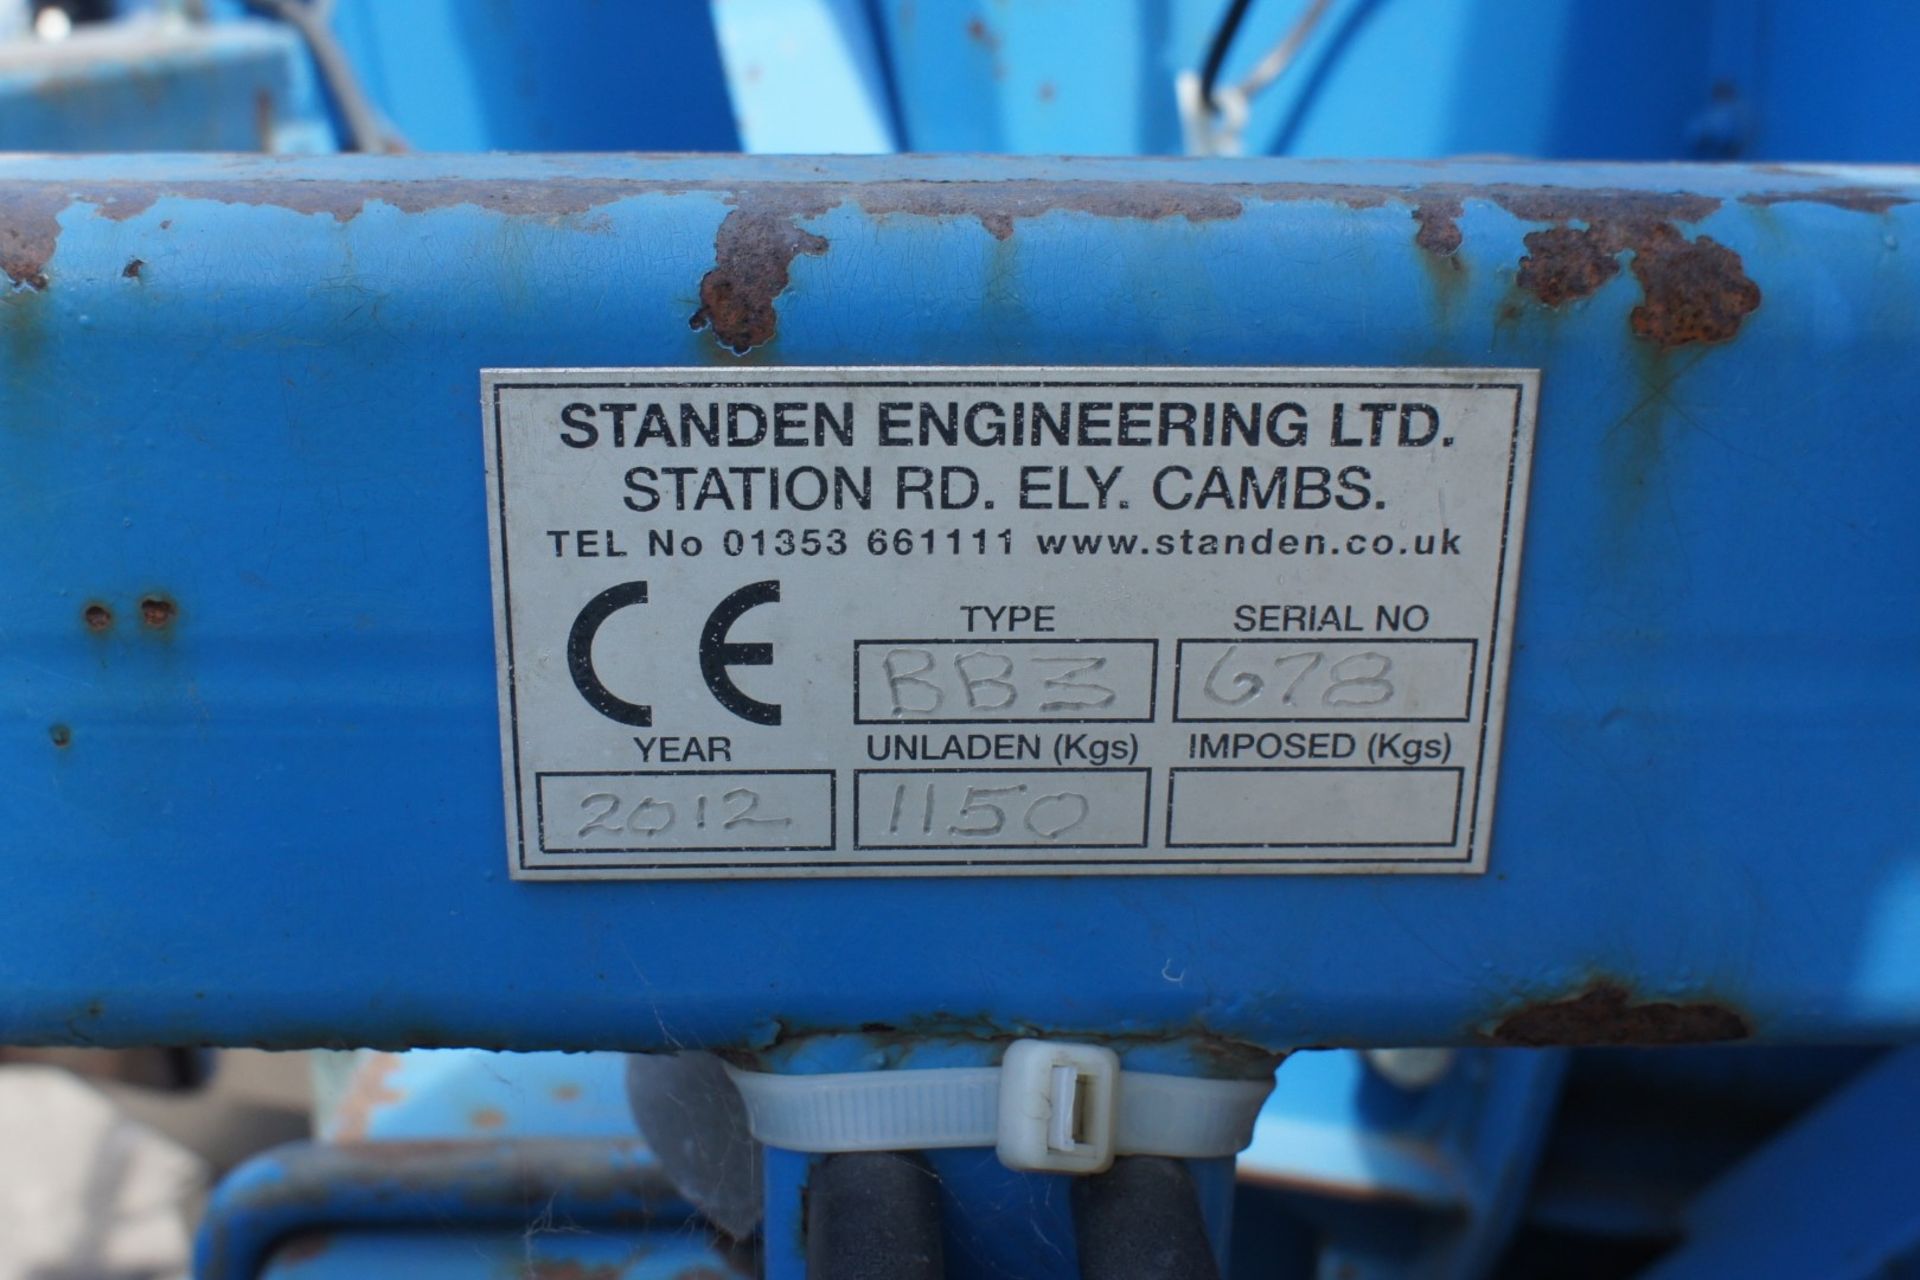 Standen Pearson BB3 (SP300), 3 Row Potato Planter, Serial Number 678, Year 2012 - Image 3 of 8